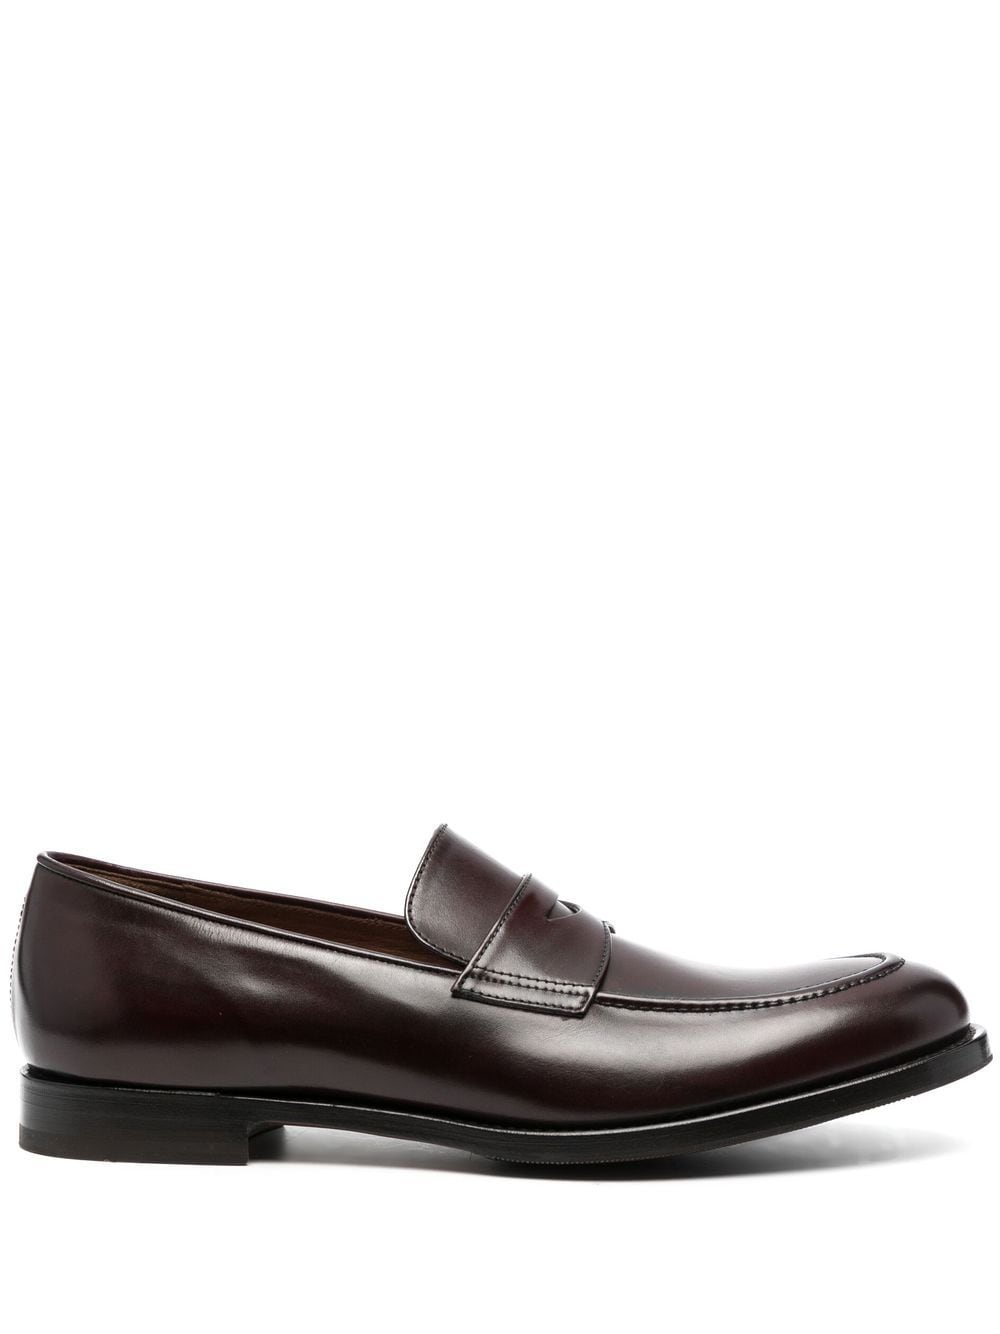 Fratelli Rossetti leather Penny loafers - Brown von Fratelli Rossetti